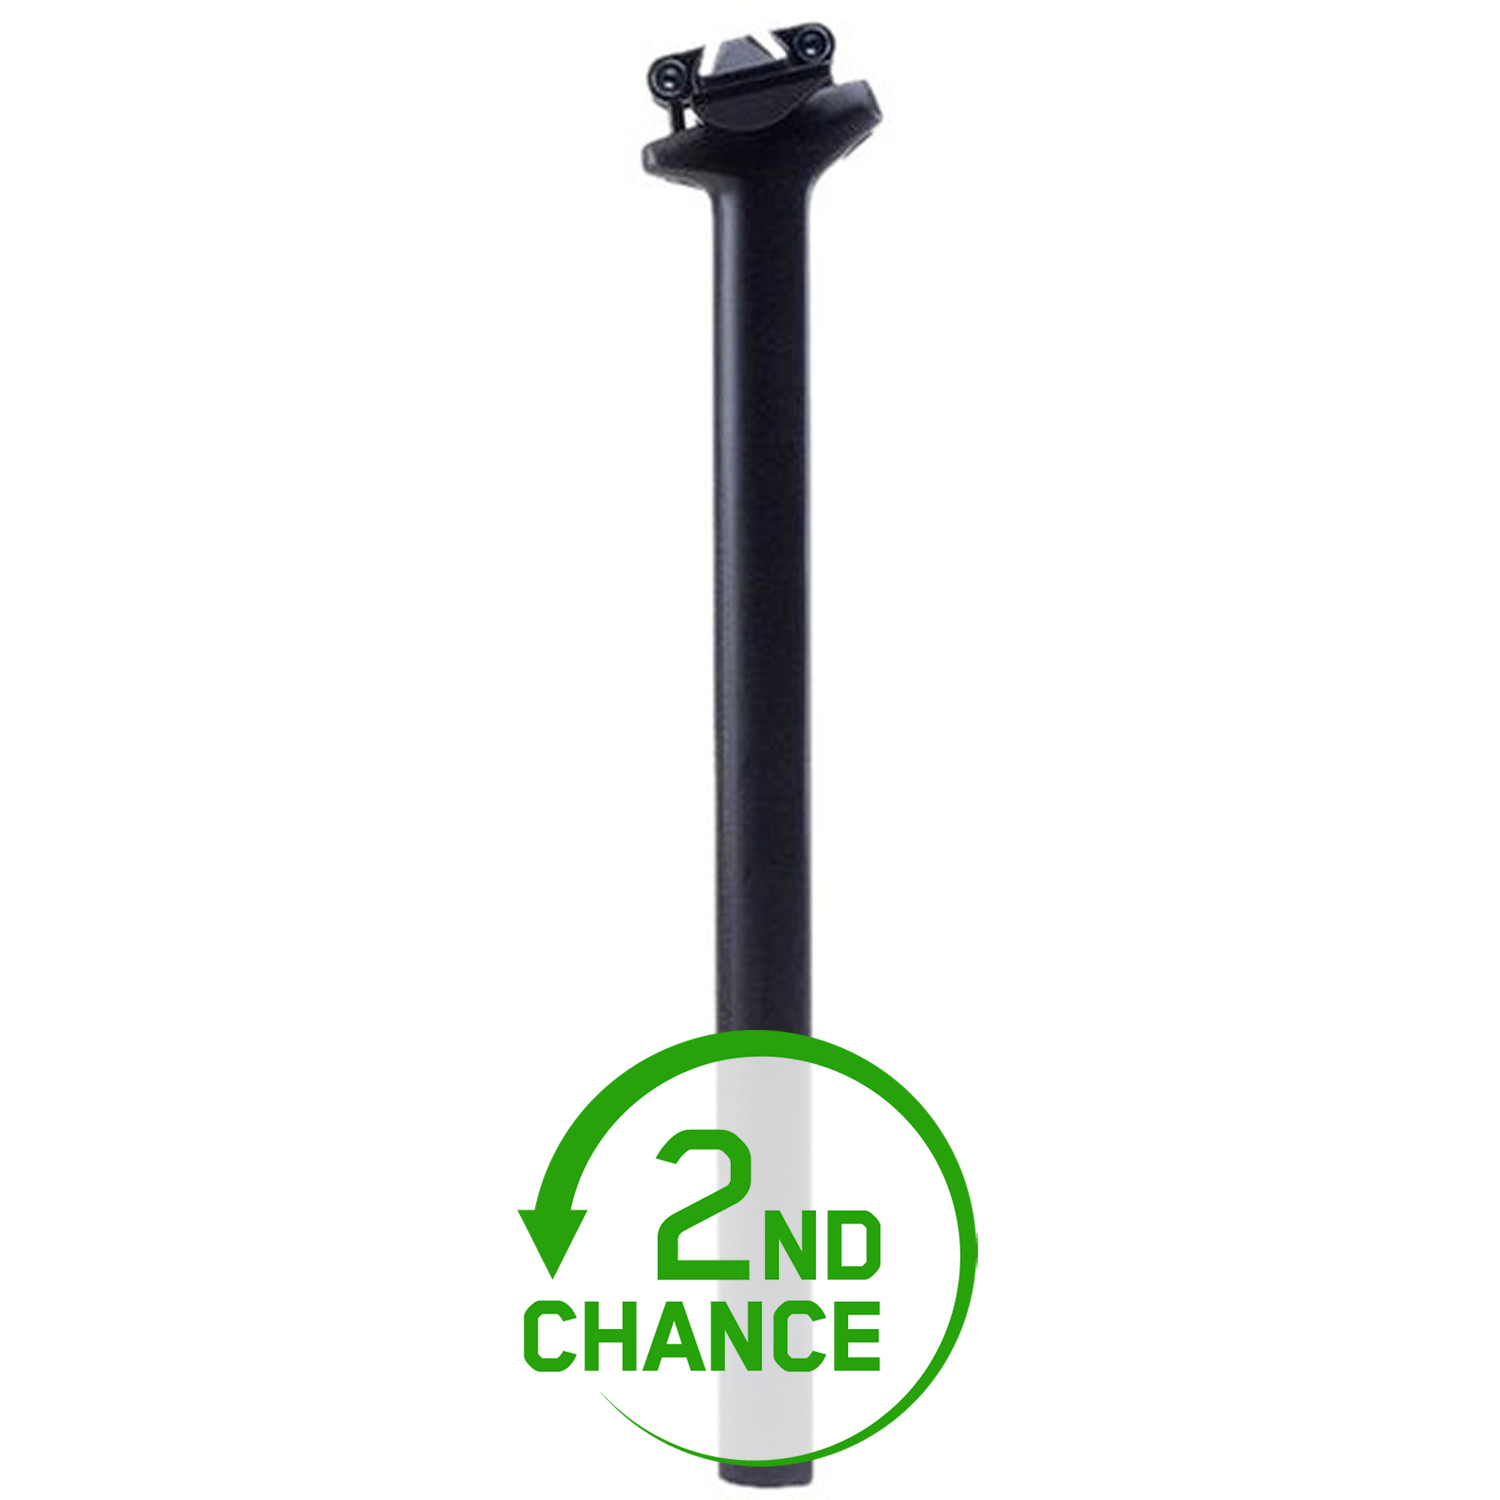 Picture of BMC Carbon Seatpost for Roadmachine 01/02 (as from 2017) - 301269 - black - 2nd Choice